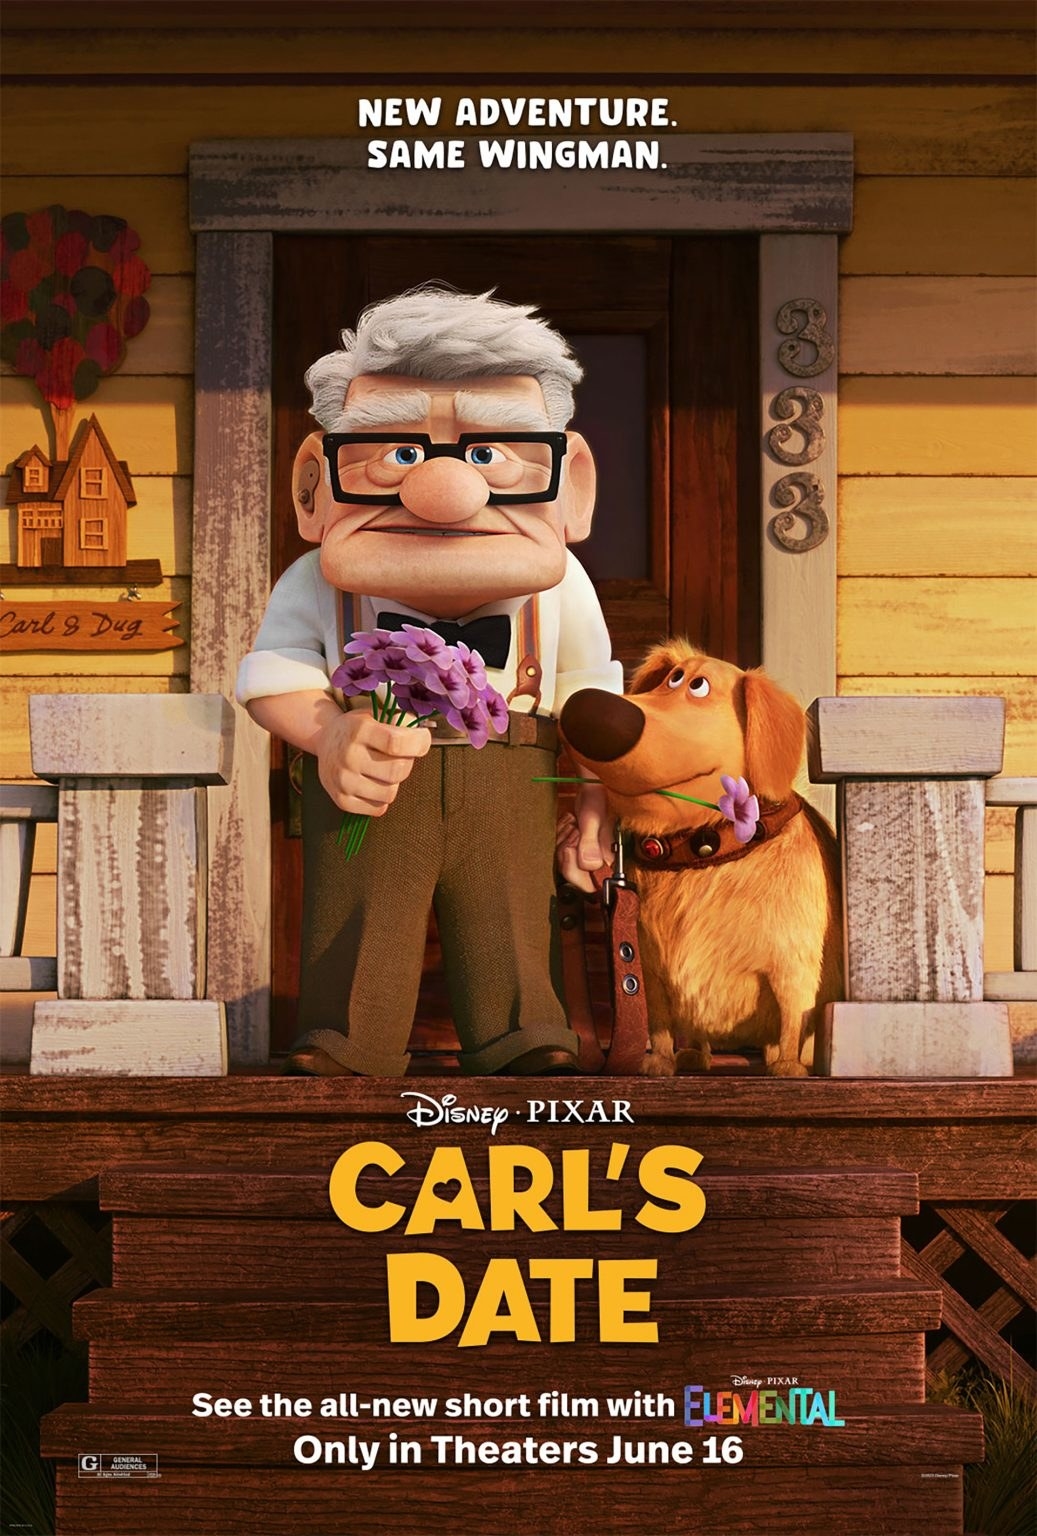 Poster for &quot;Carl&#x27;s Date,&quot; featuring Carl and the dog Dug, in theaters June 16: &quot;New adventure, same wingman&quot;